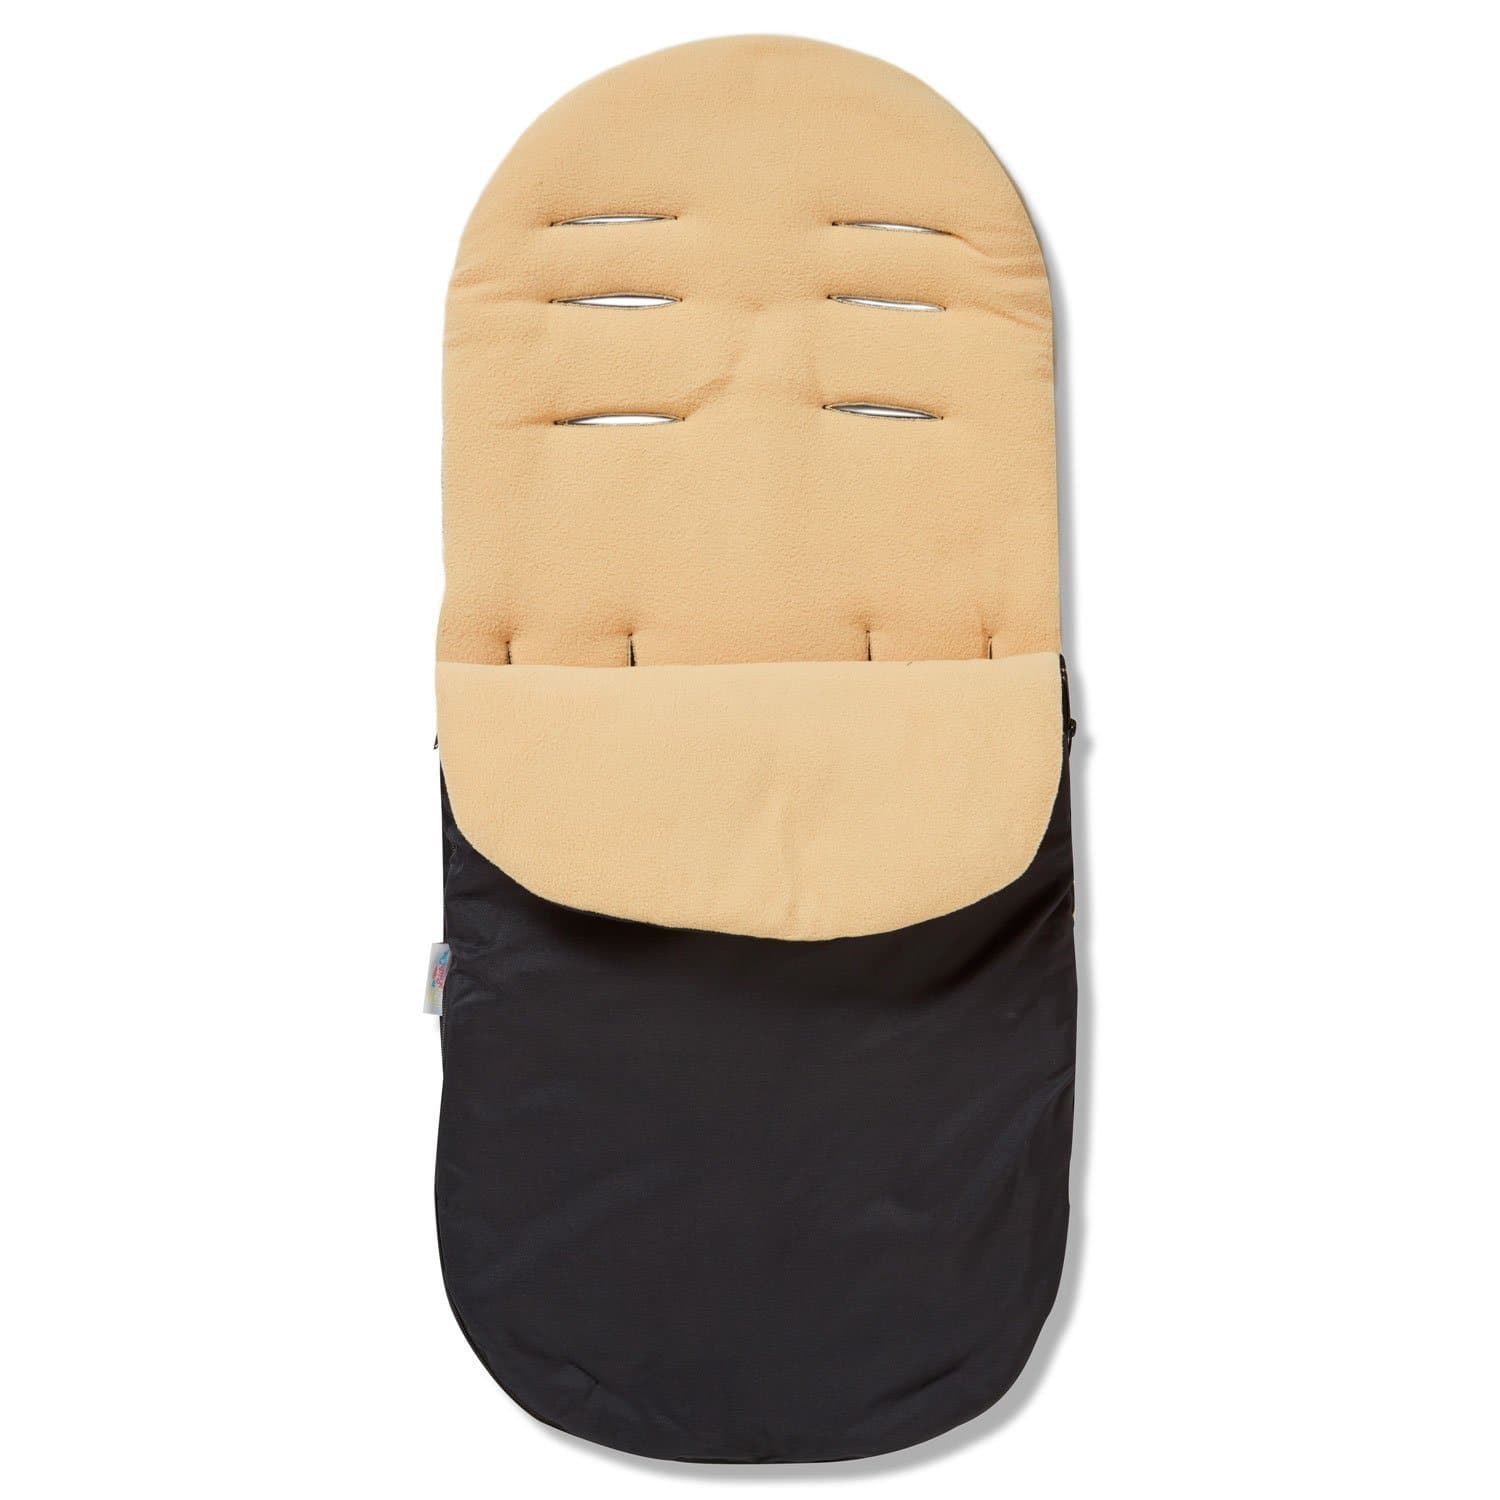 Footmuff / Cosy Toes Compatible with Emmaljunga - Sand / Fits All Models | For Your Little One